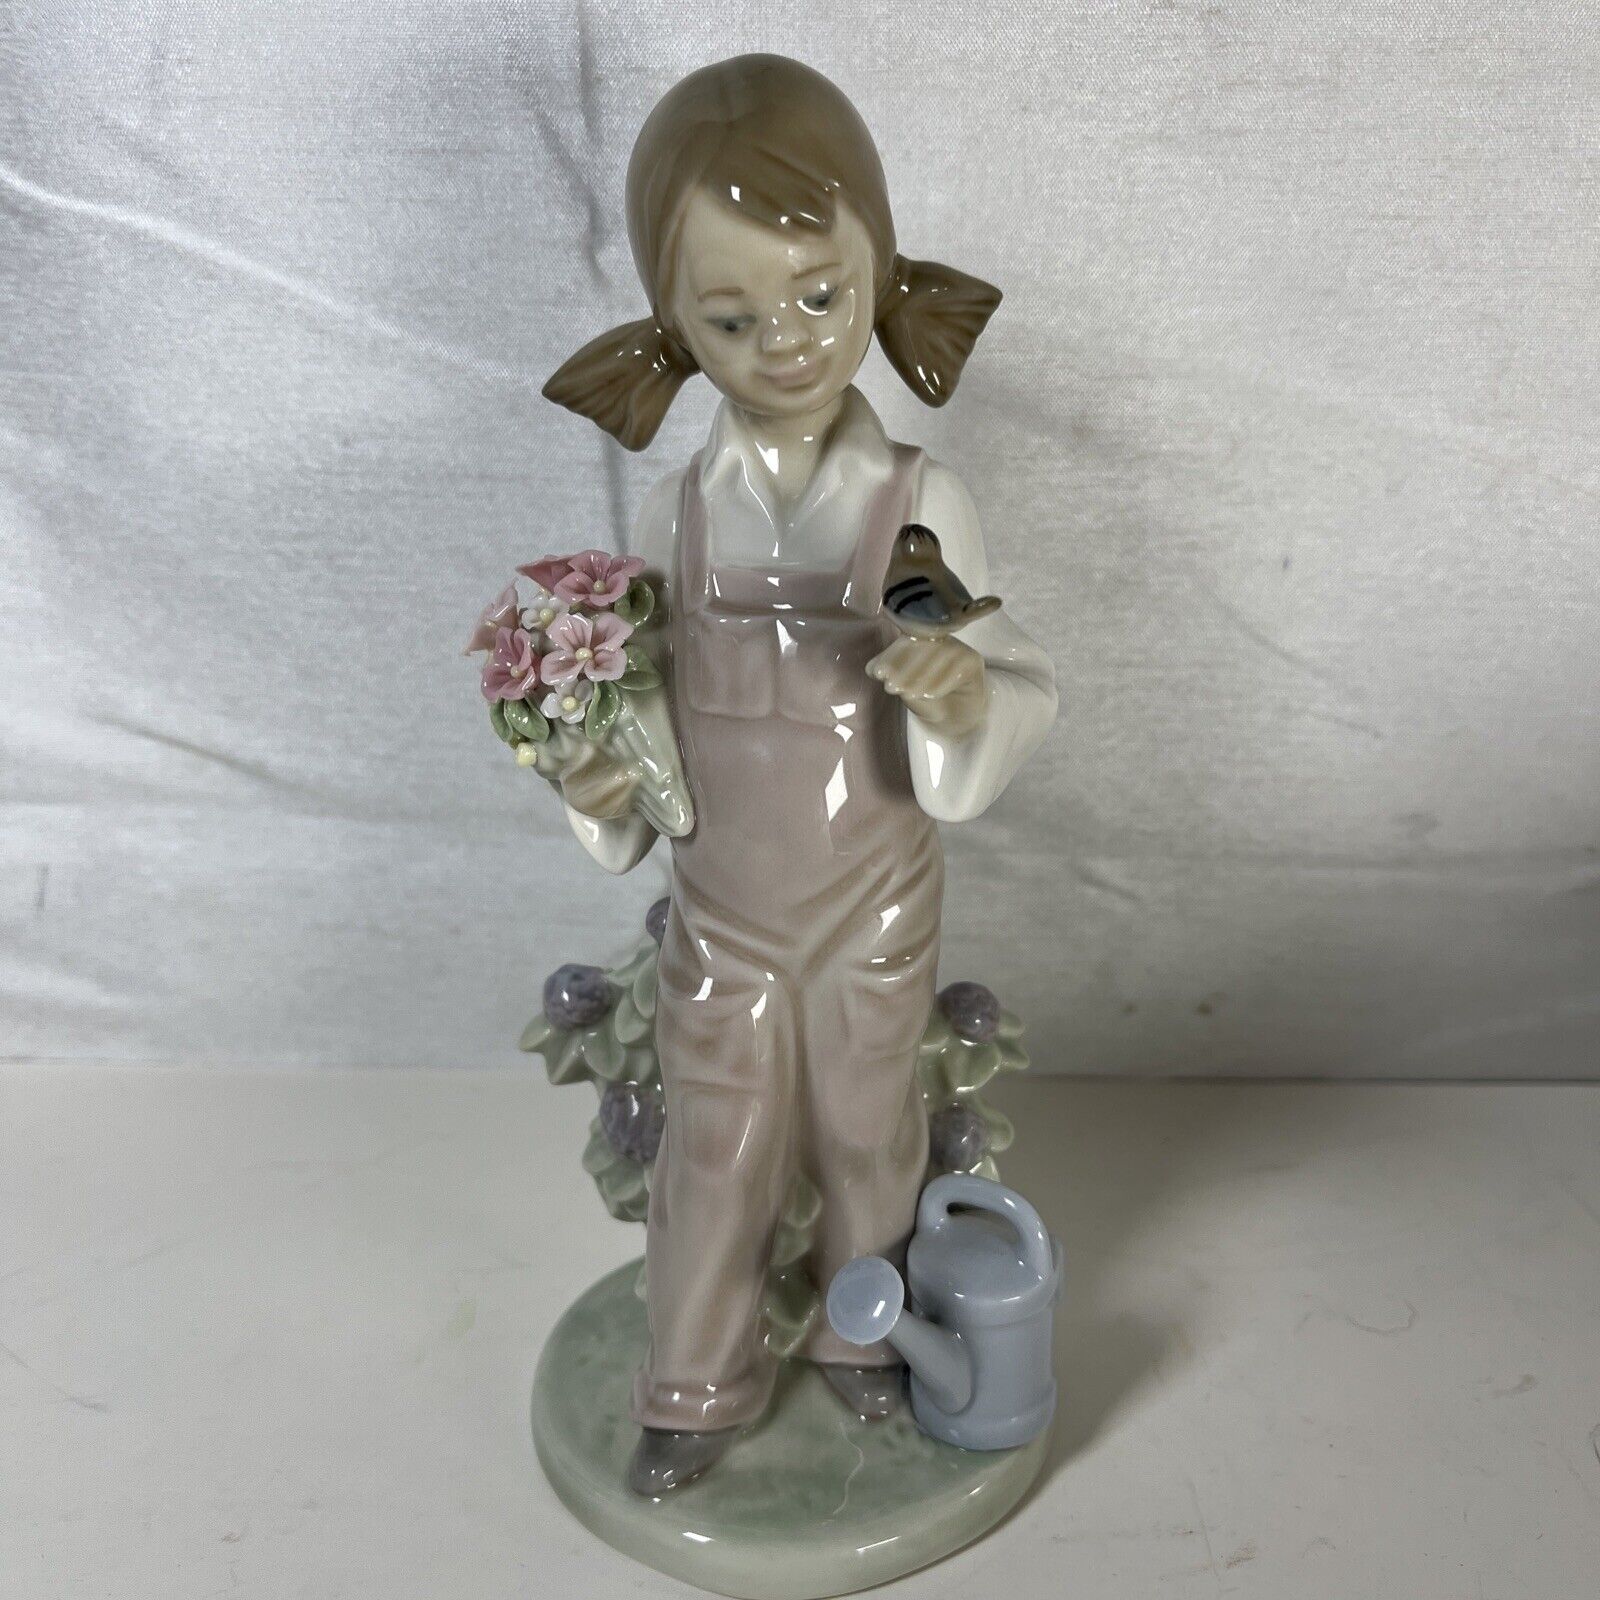 Lladro Figurine SPRING GIRL with FLOWERS BIRD & WATERING CAN #5217 Retired